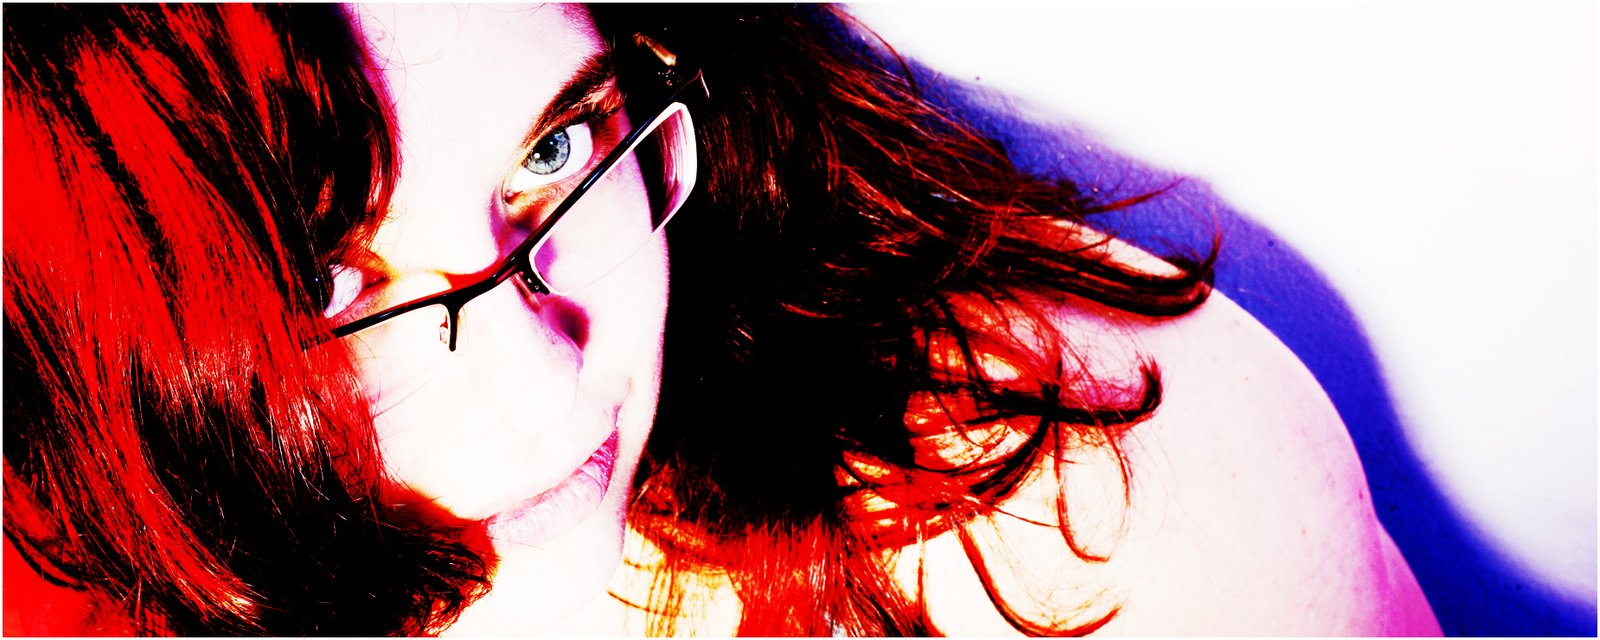 woman in glasses making face with red hair